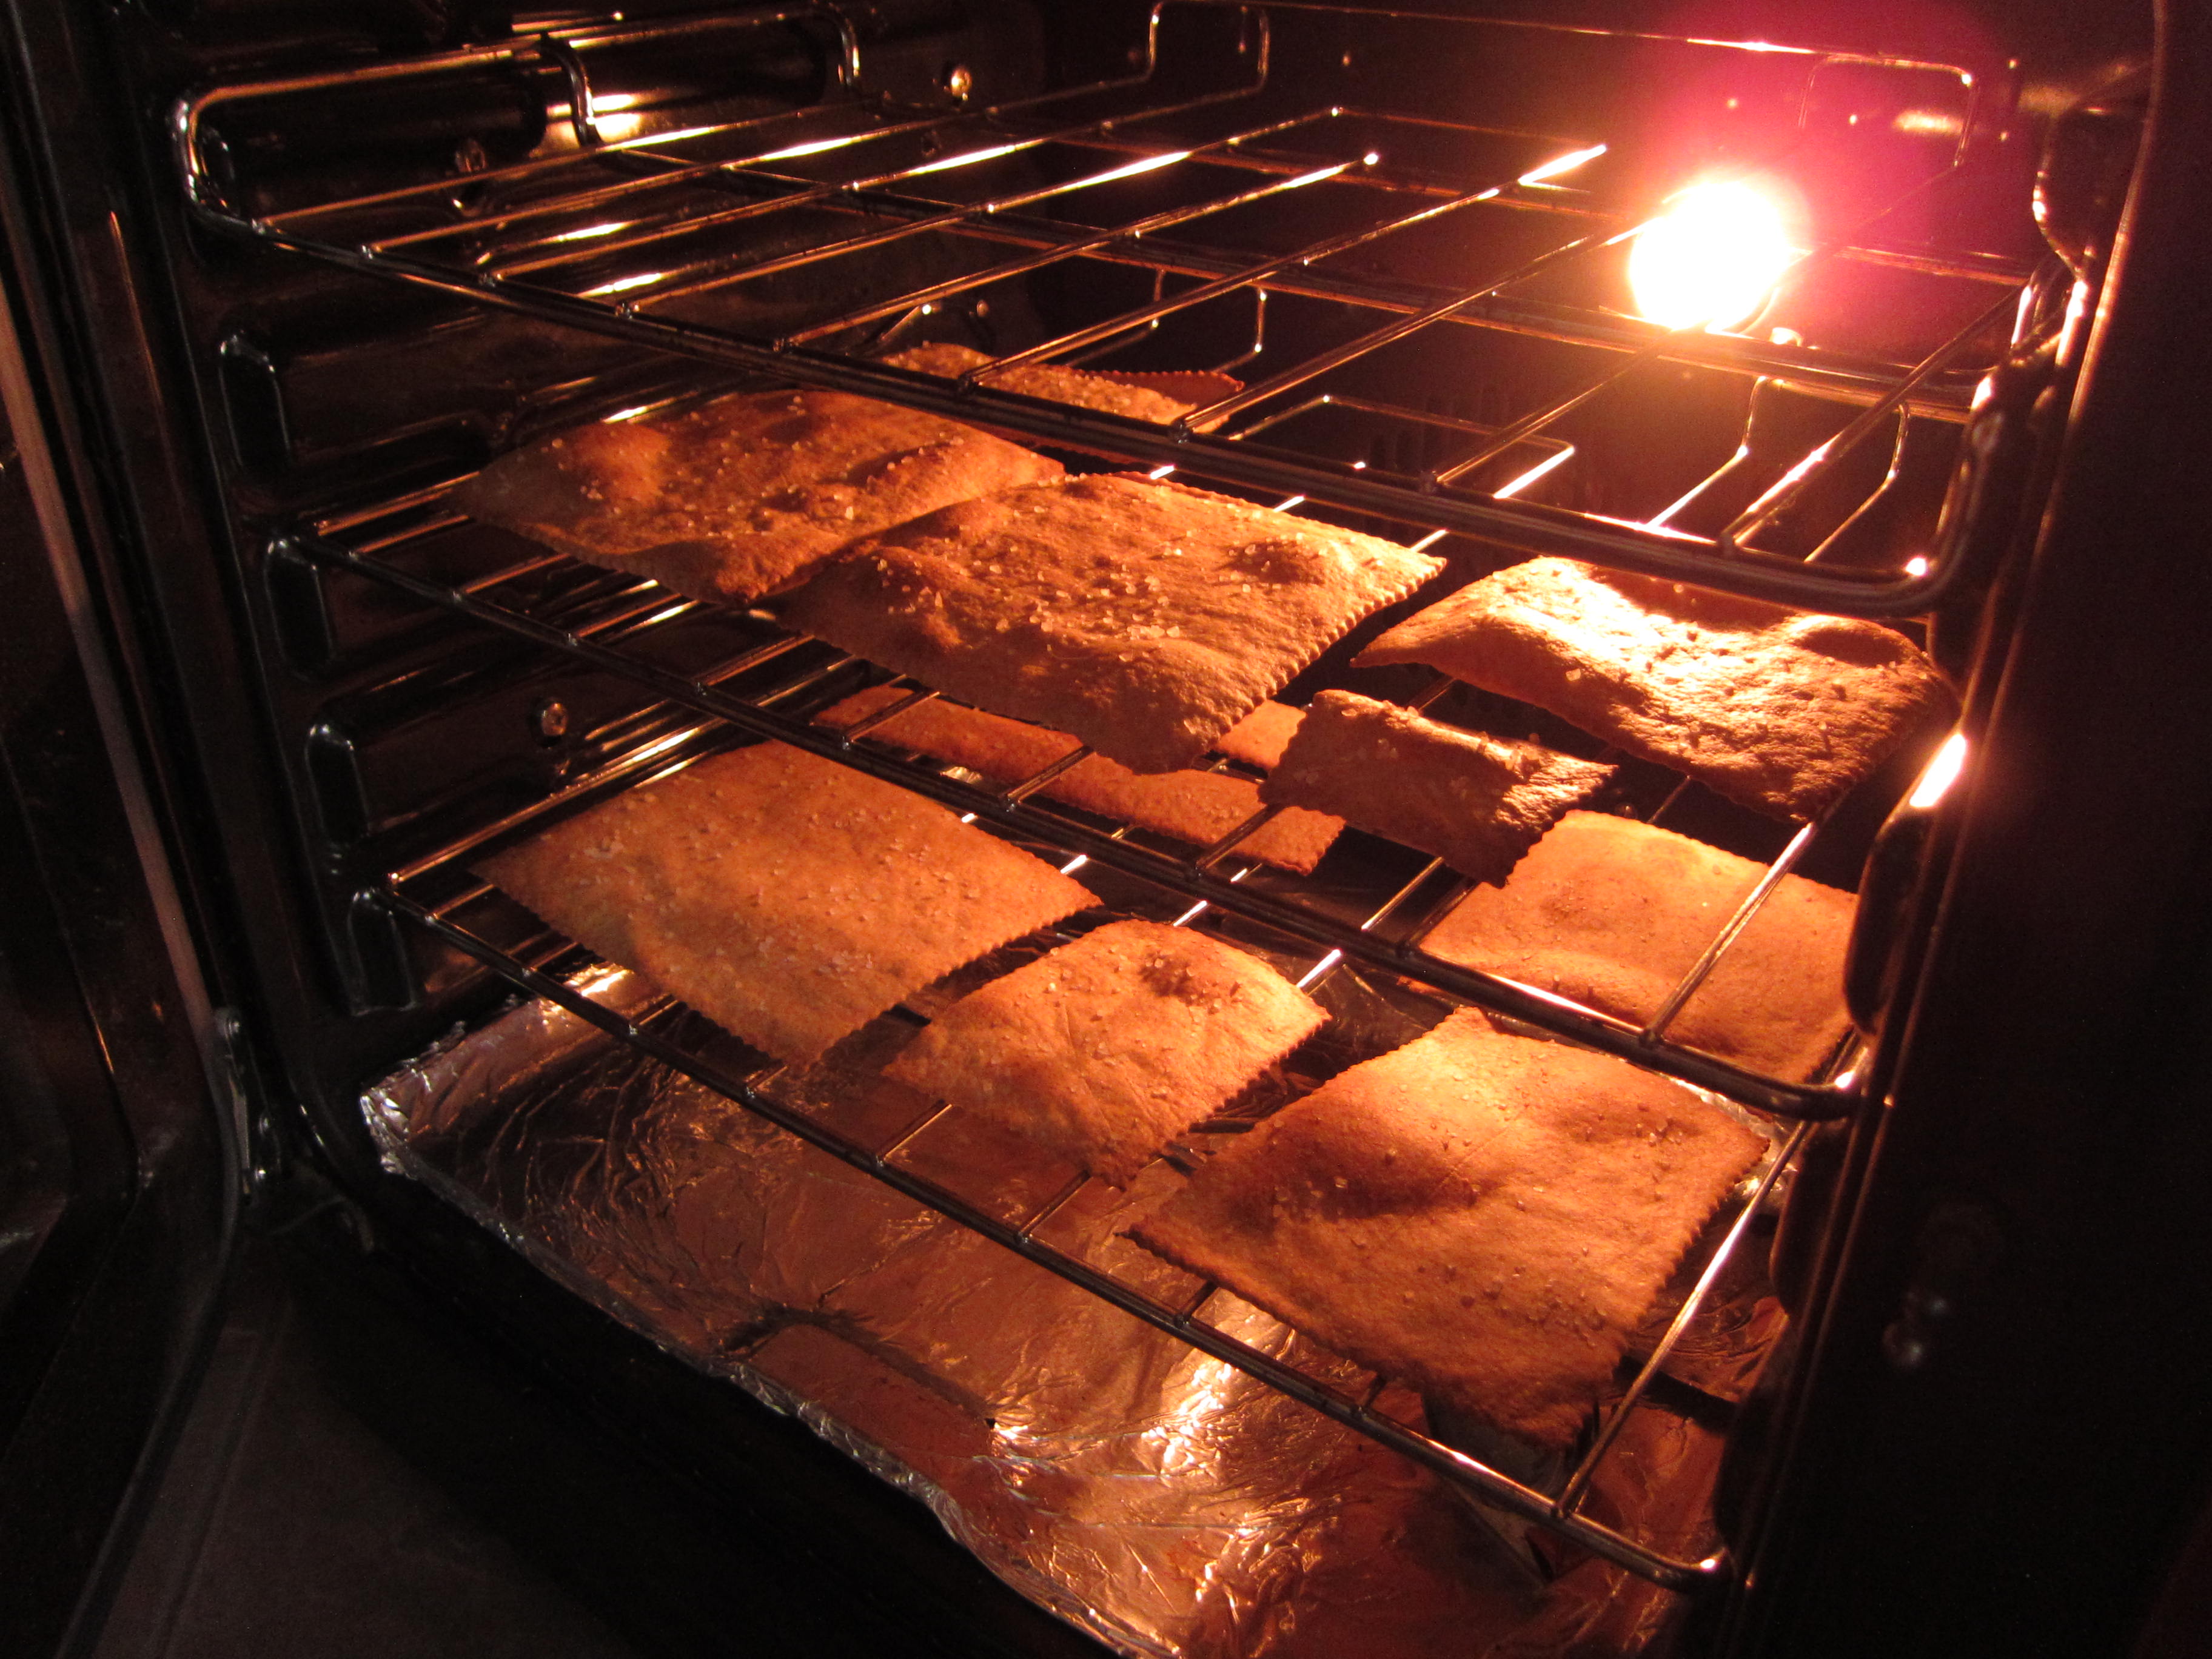 A final 15 minutes in the oven helps get them really crisp.